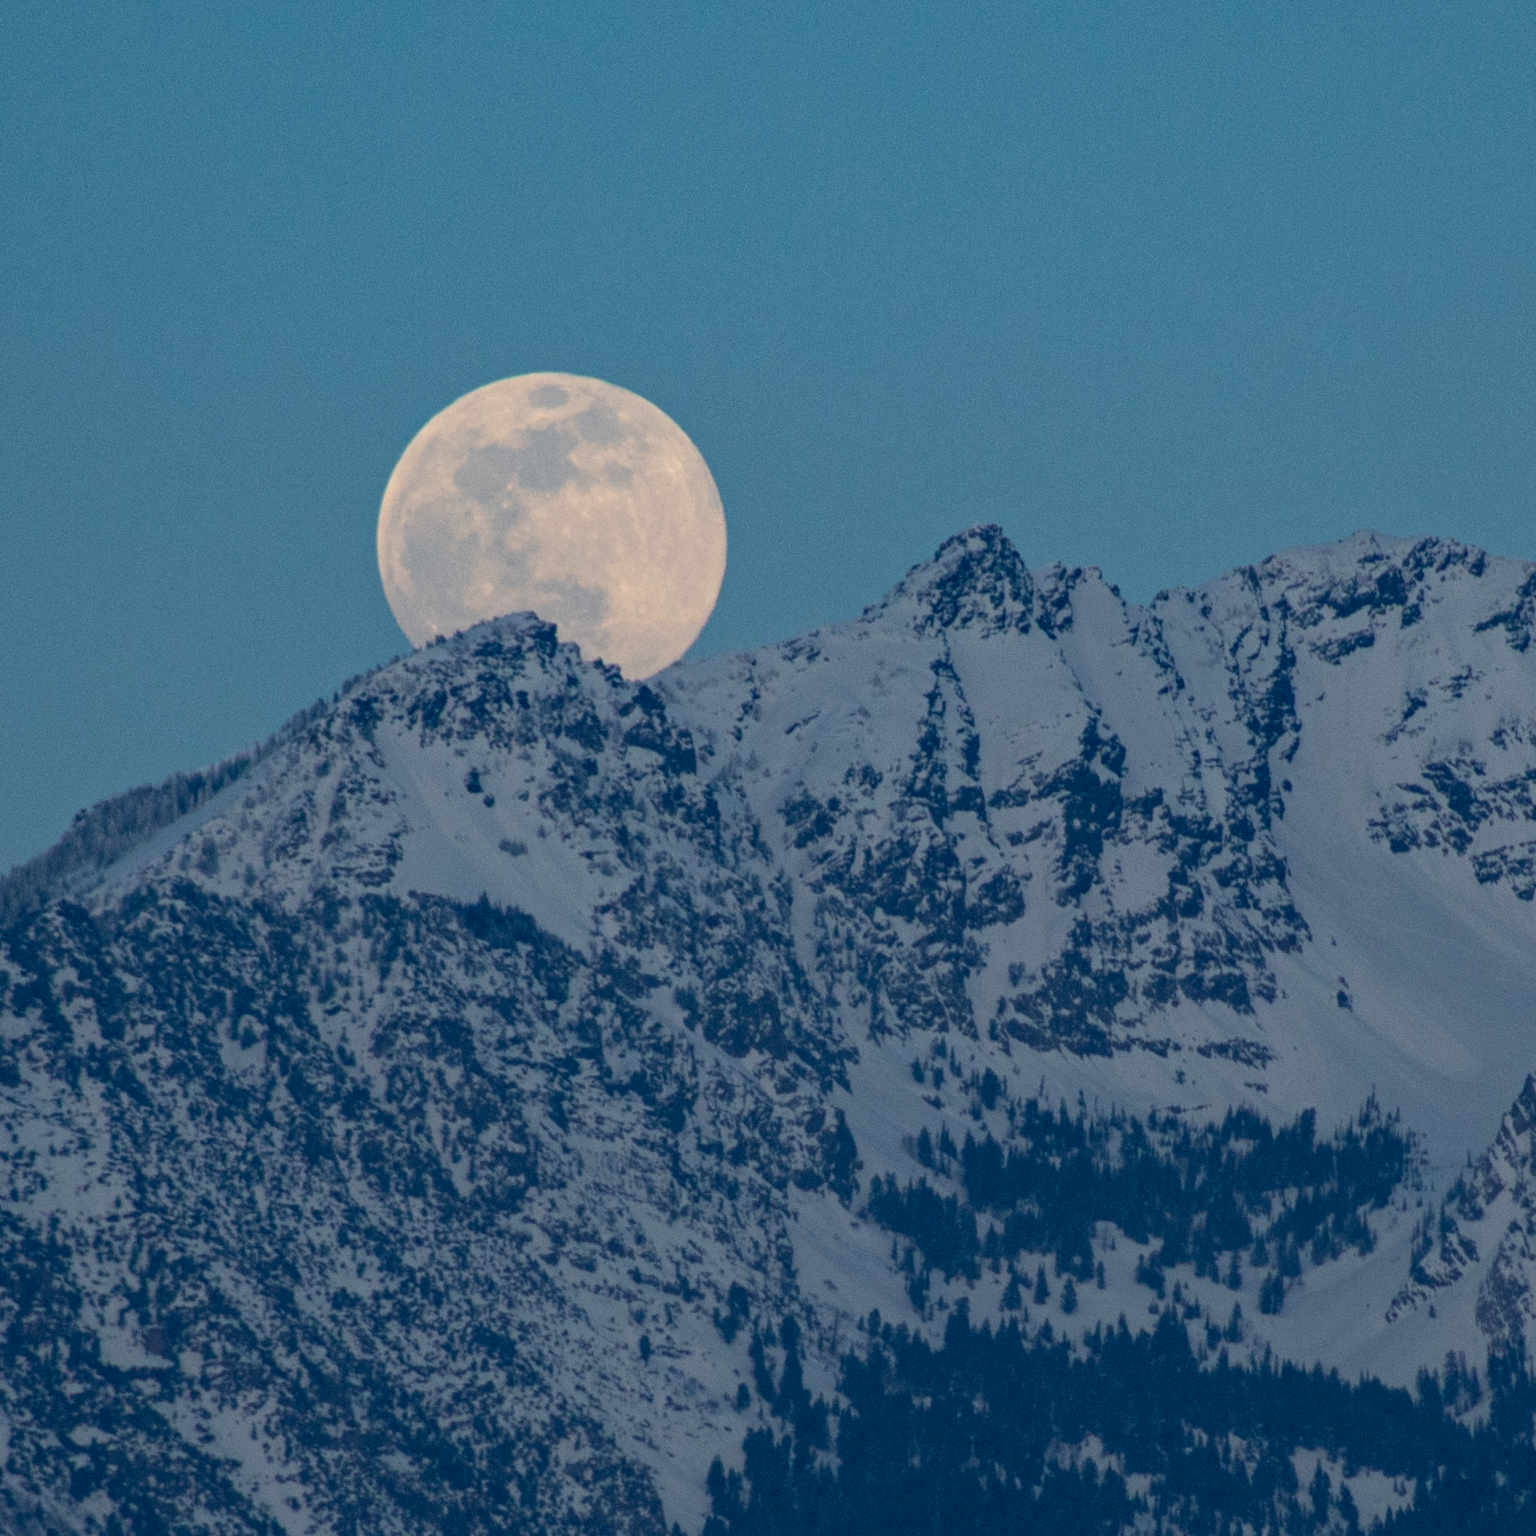 A full moon rises above snow-capped mountain peaks in this chilly image.